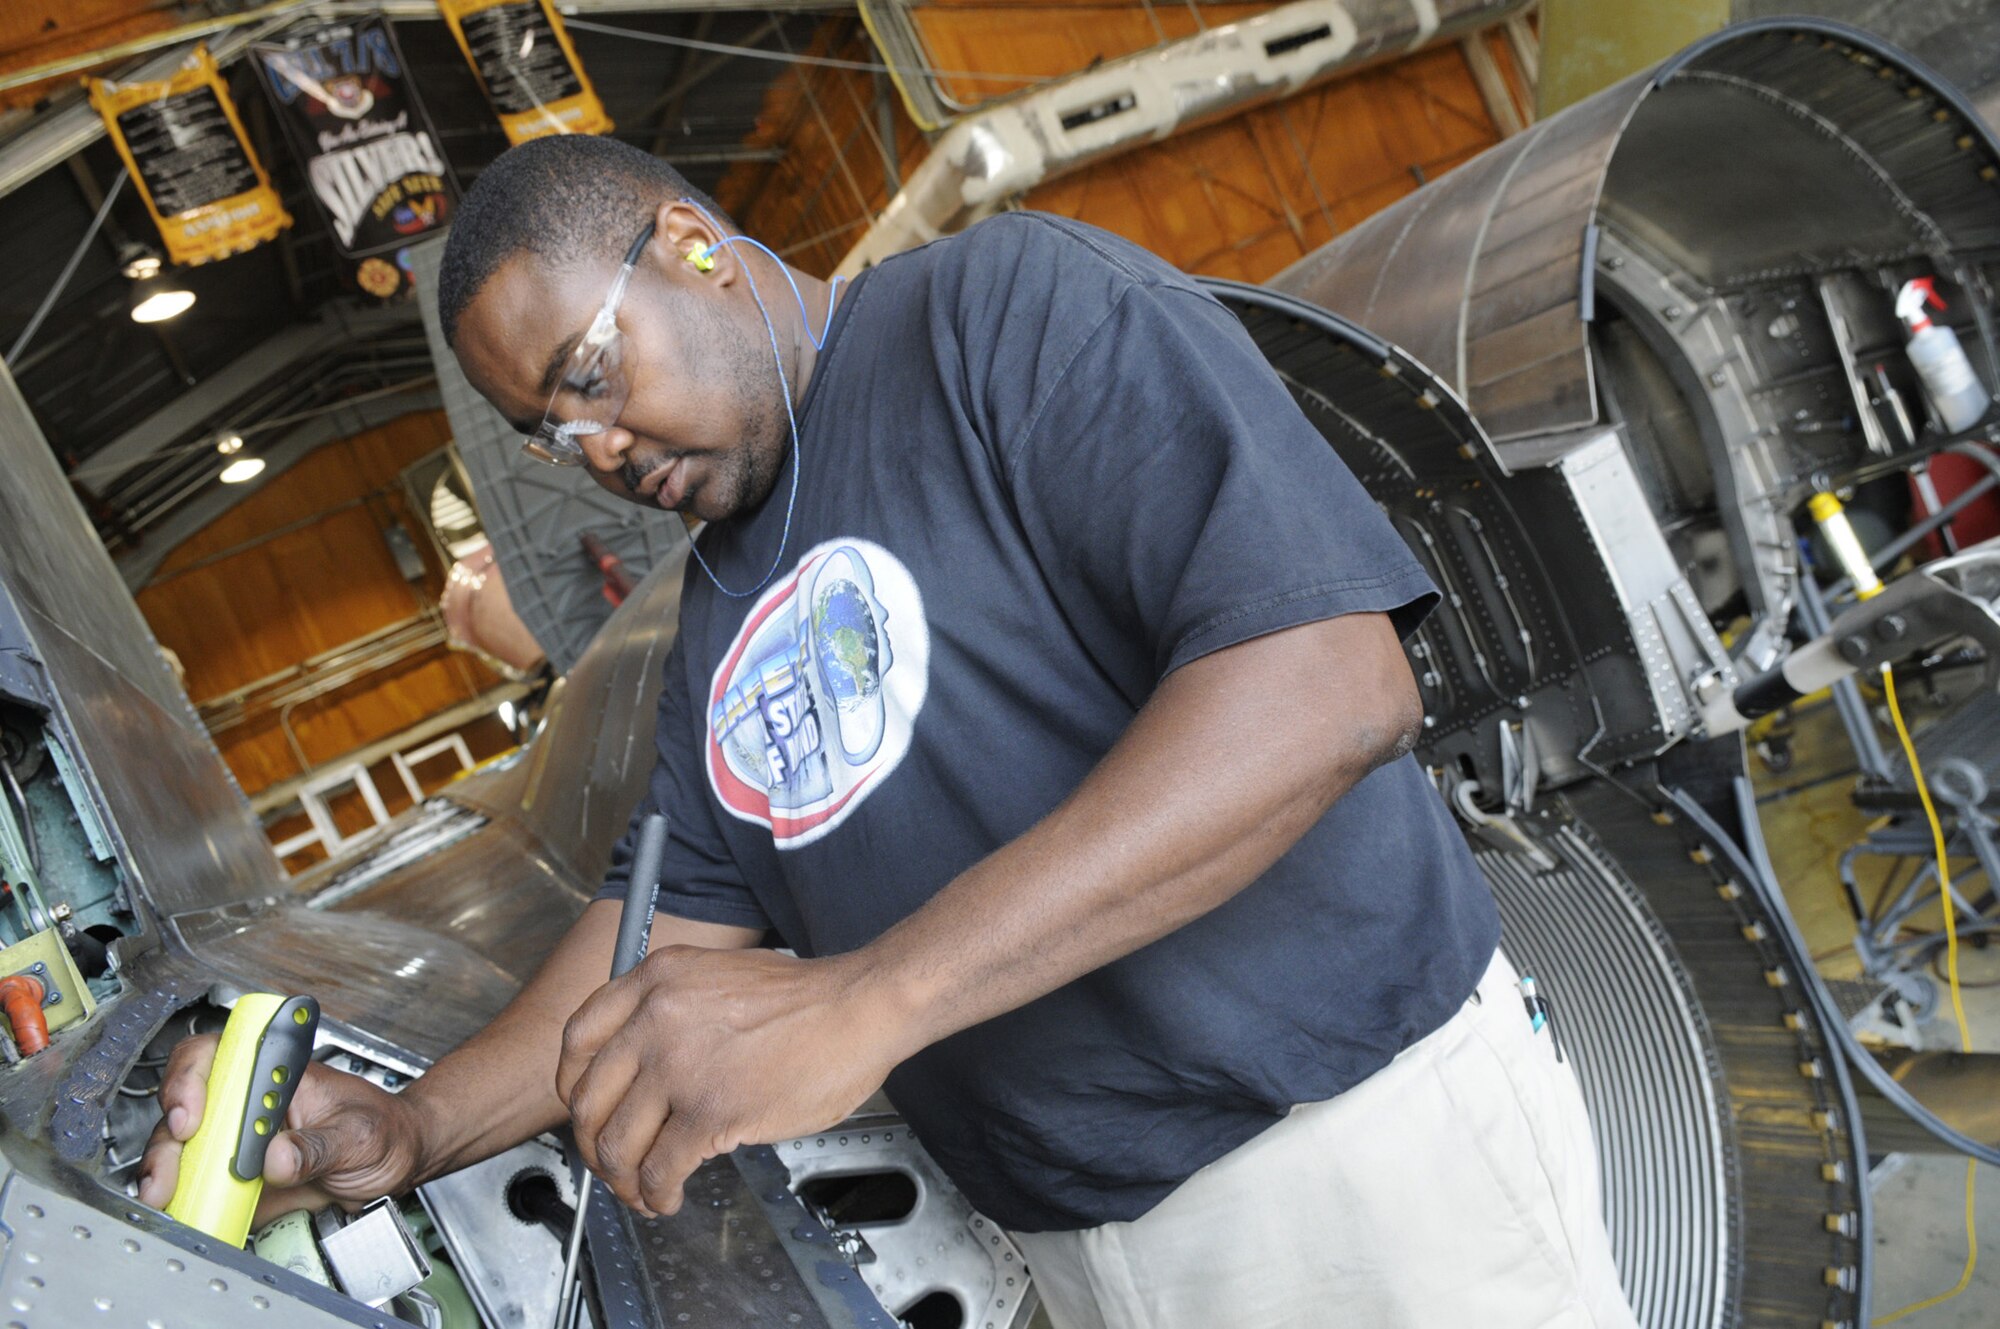 Keith Hall, 561st Aircraft Maintenance Squadron’s B Flight, inspects an F-15 Strike Eagle for foreign object debris before it goes to functional test. U. S. Air Force photo by Sue Sapp